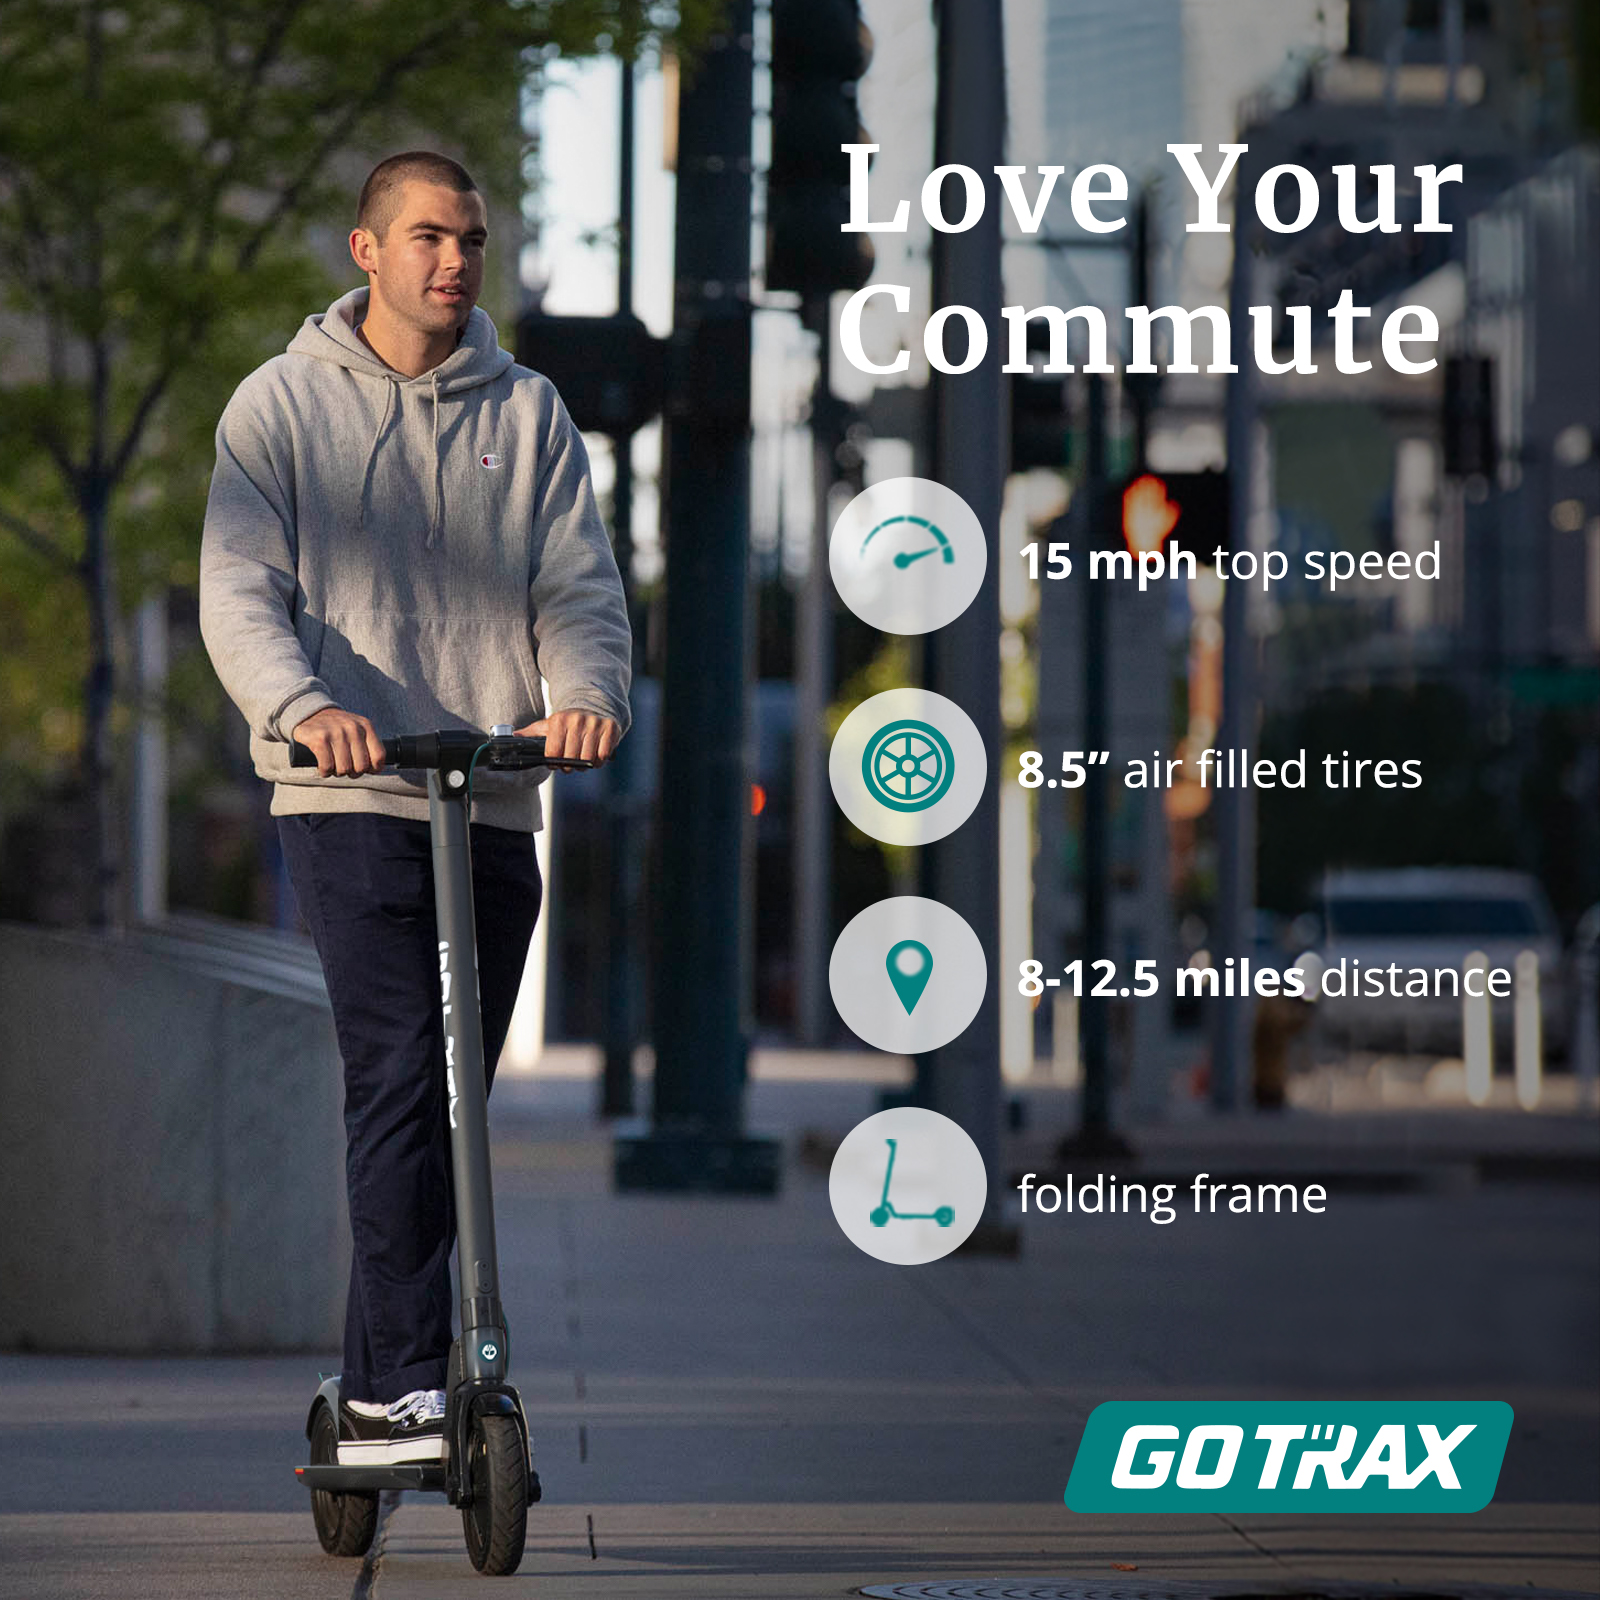 GOTRAX Rival Adult Electric Scooter, 8.5" Pneumatic Tire, Max 12 mile Range and 15.5Mph Speed, 250W Foldable Escooter for Adult, Charcoal Gray - image 5 of 10